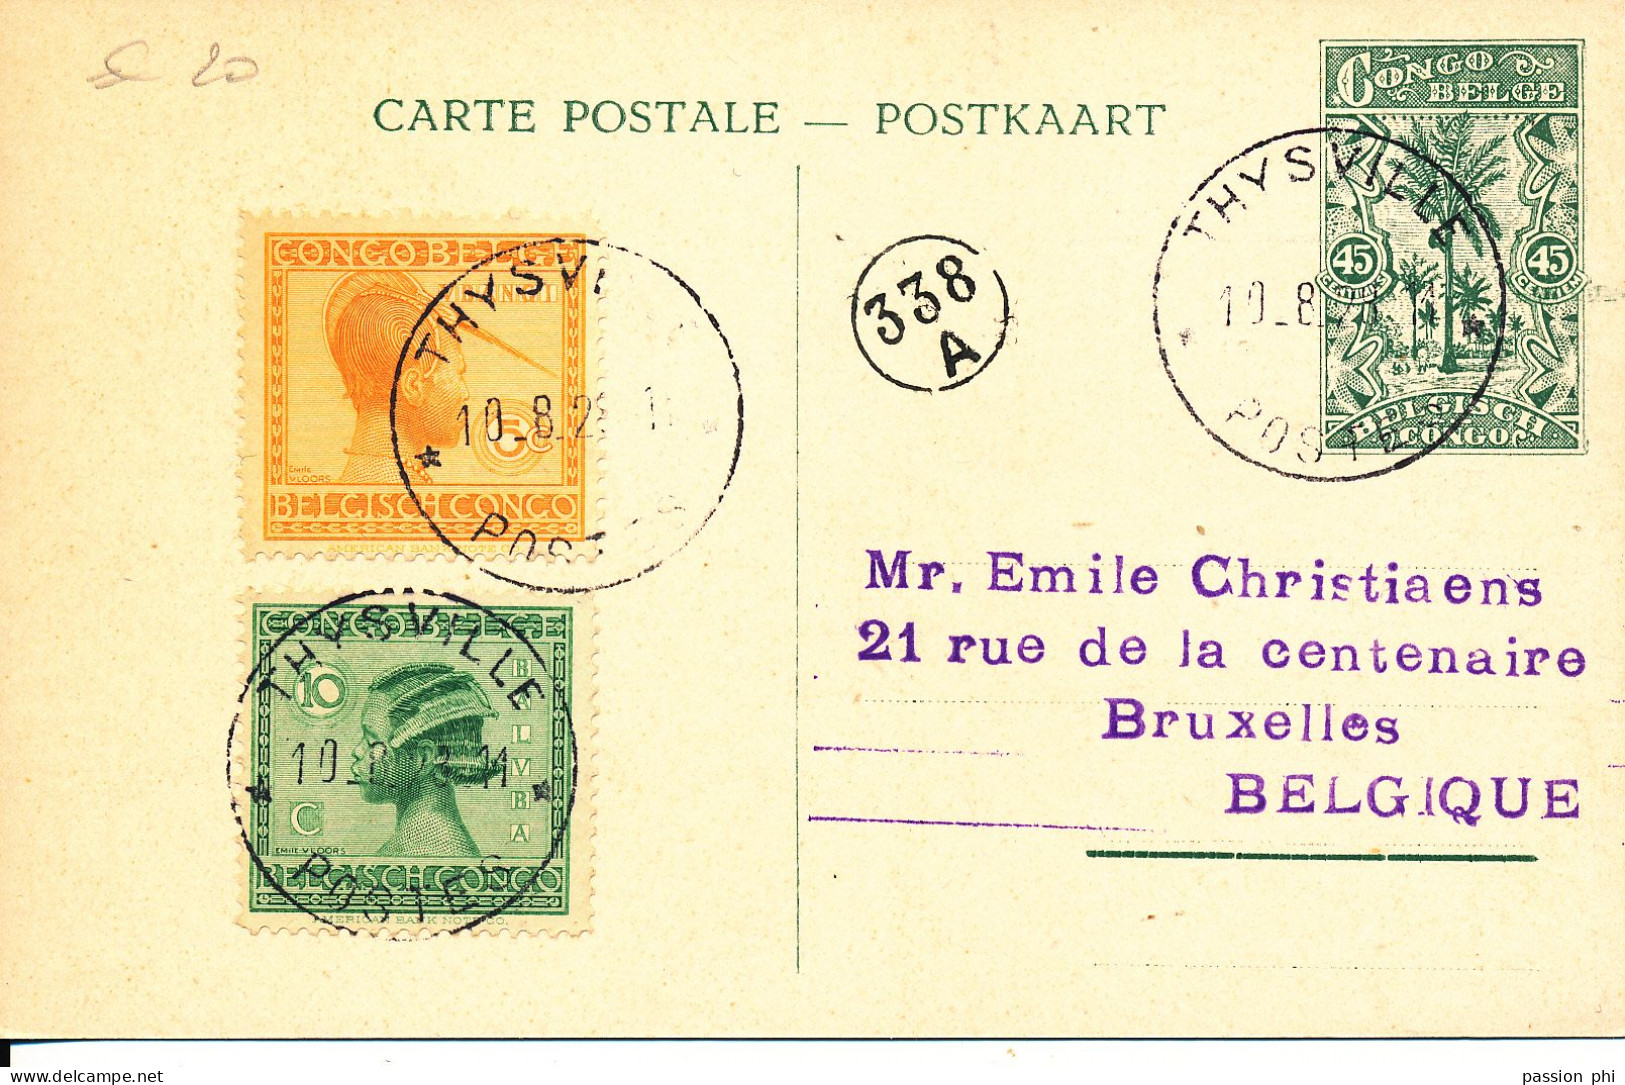 BELGIAN CONGO 1912 ISSUE PPS SBEP 66a VIEW 6 USED - Stamped Stationery